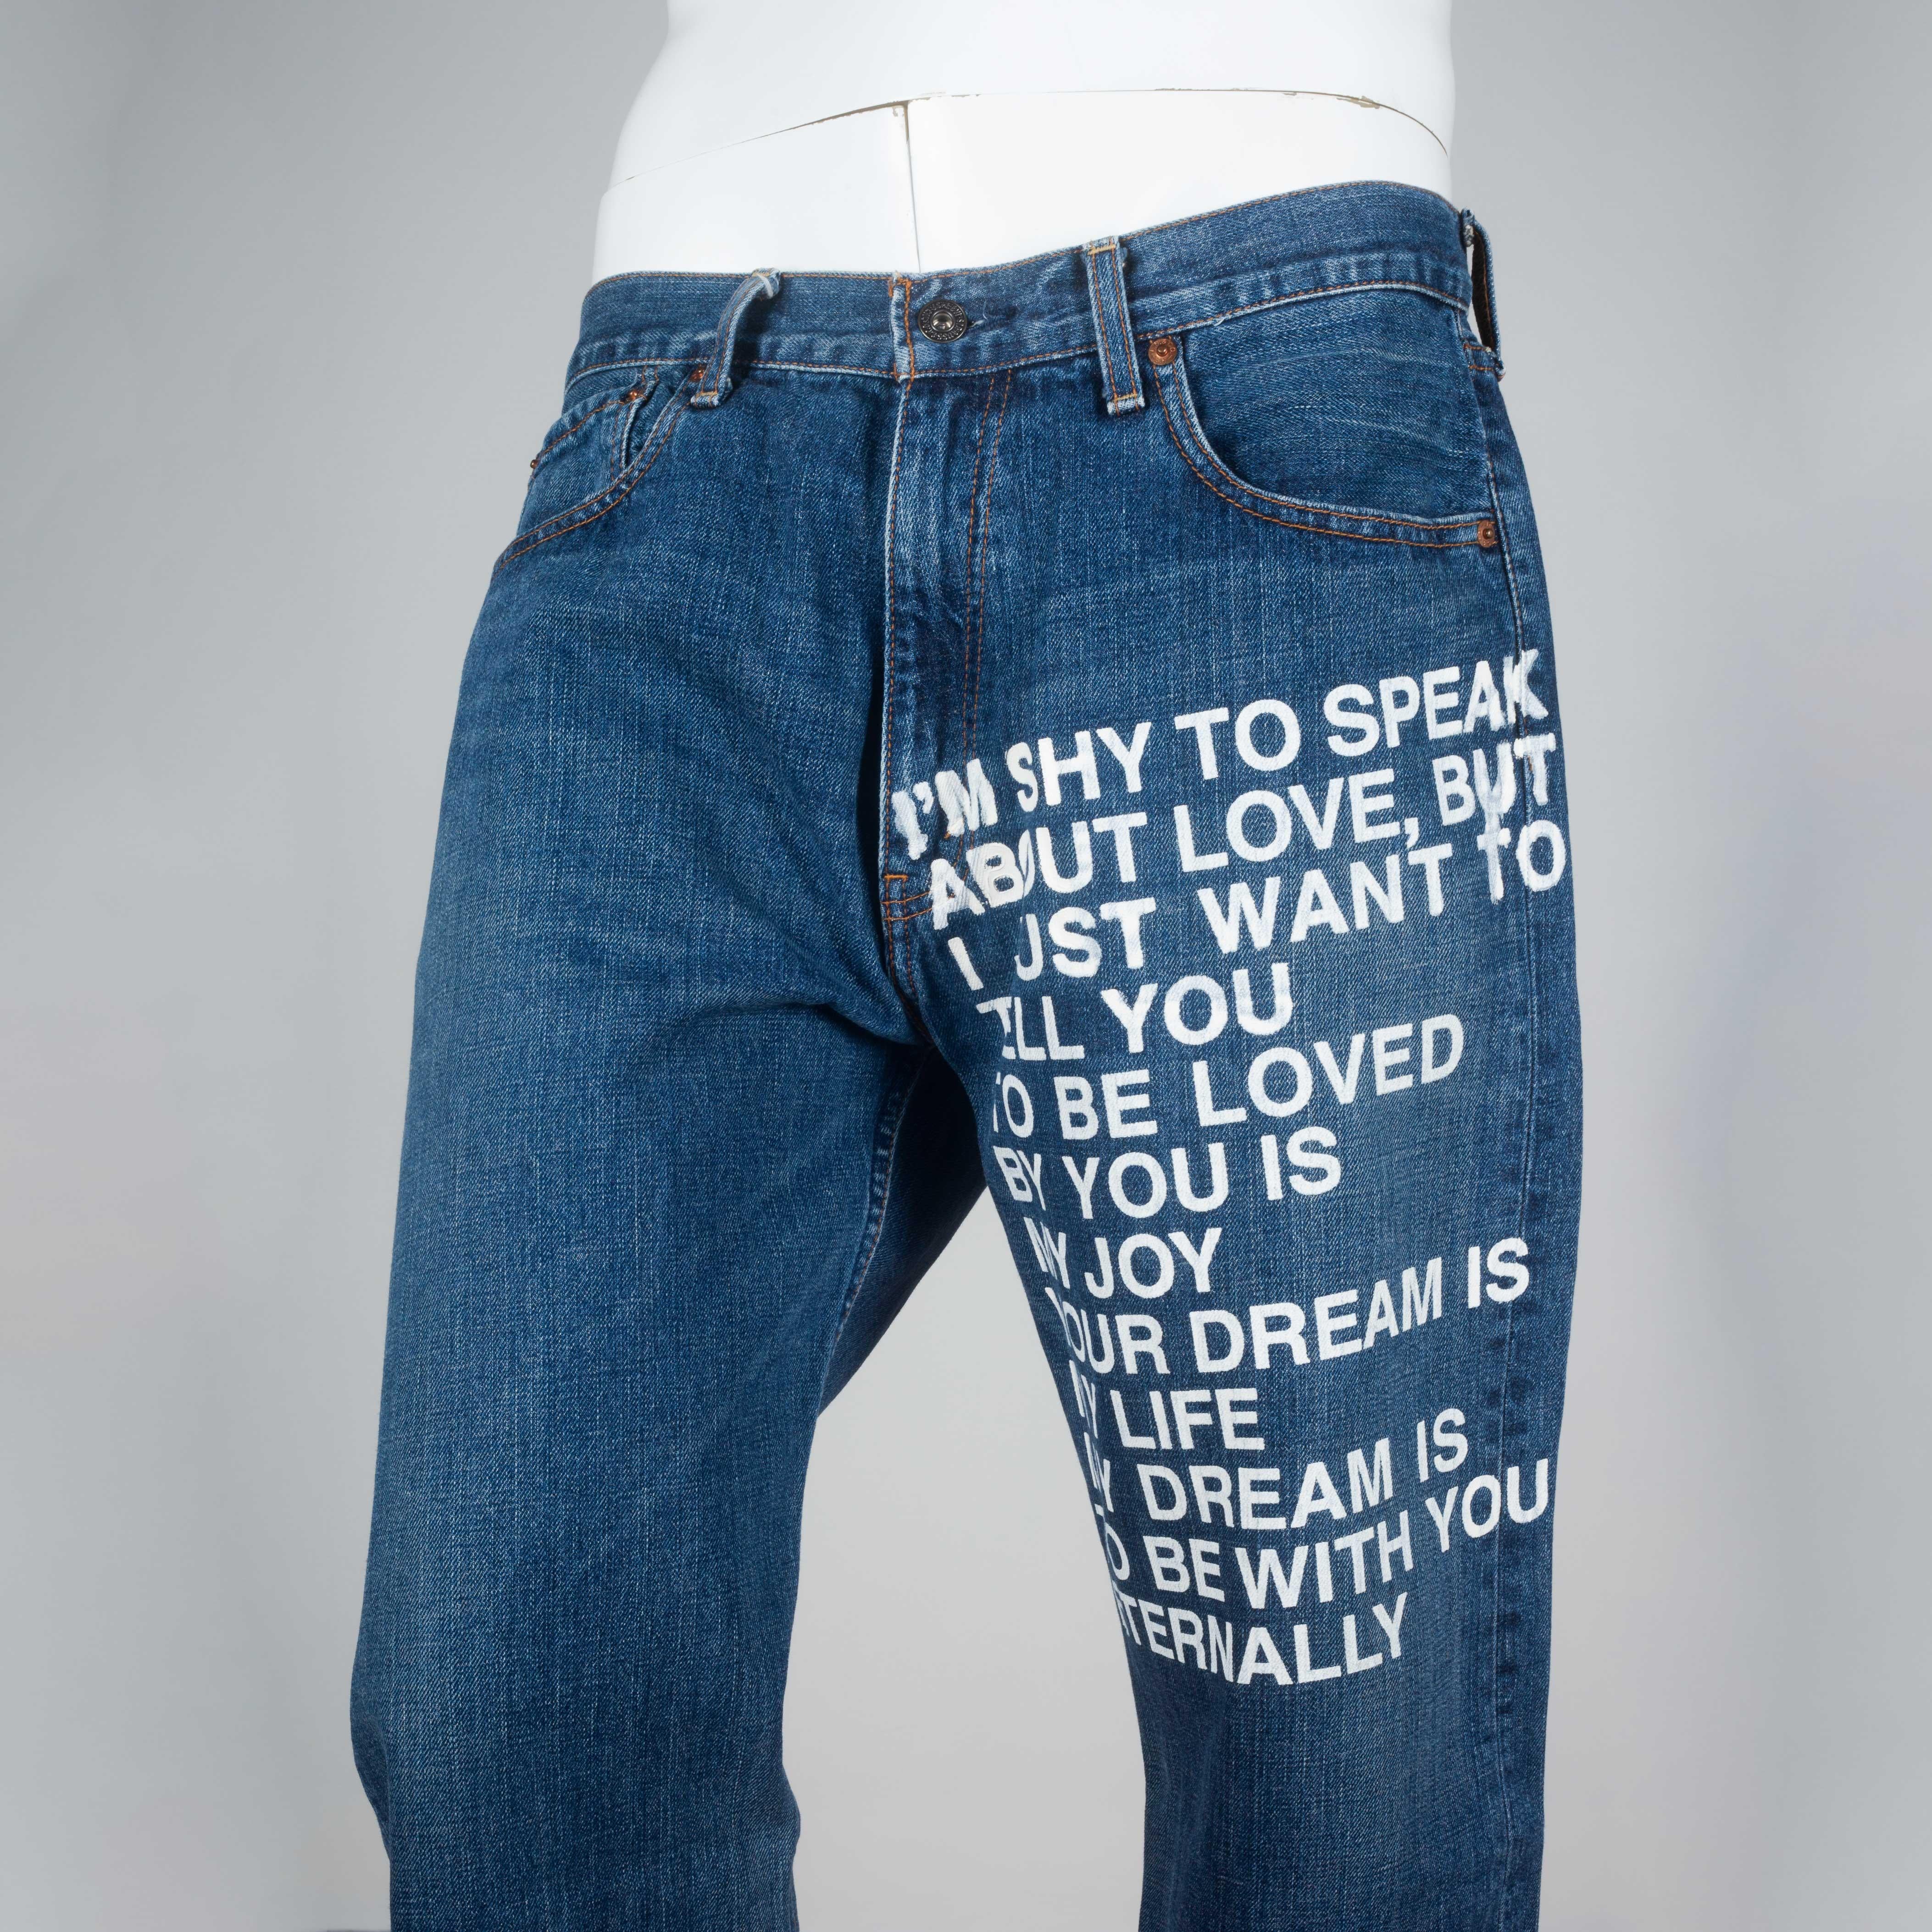 Junya Watanabe Comme des Garçons x Levi's vintage archive 2001 poem jeans from Japan. Watanabe excels in reinventing iconic classic like Levi's jeans, here with a poetic message. Medium wash, straight cut. Poem reads:

I'm shy to speak about